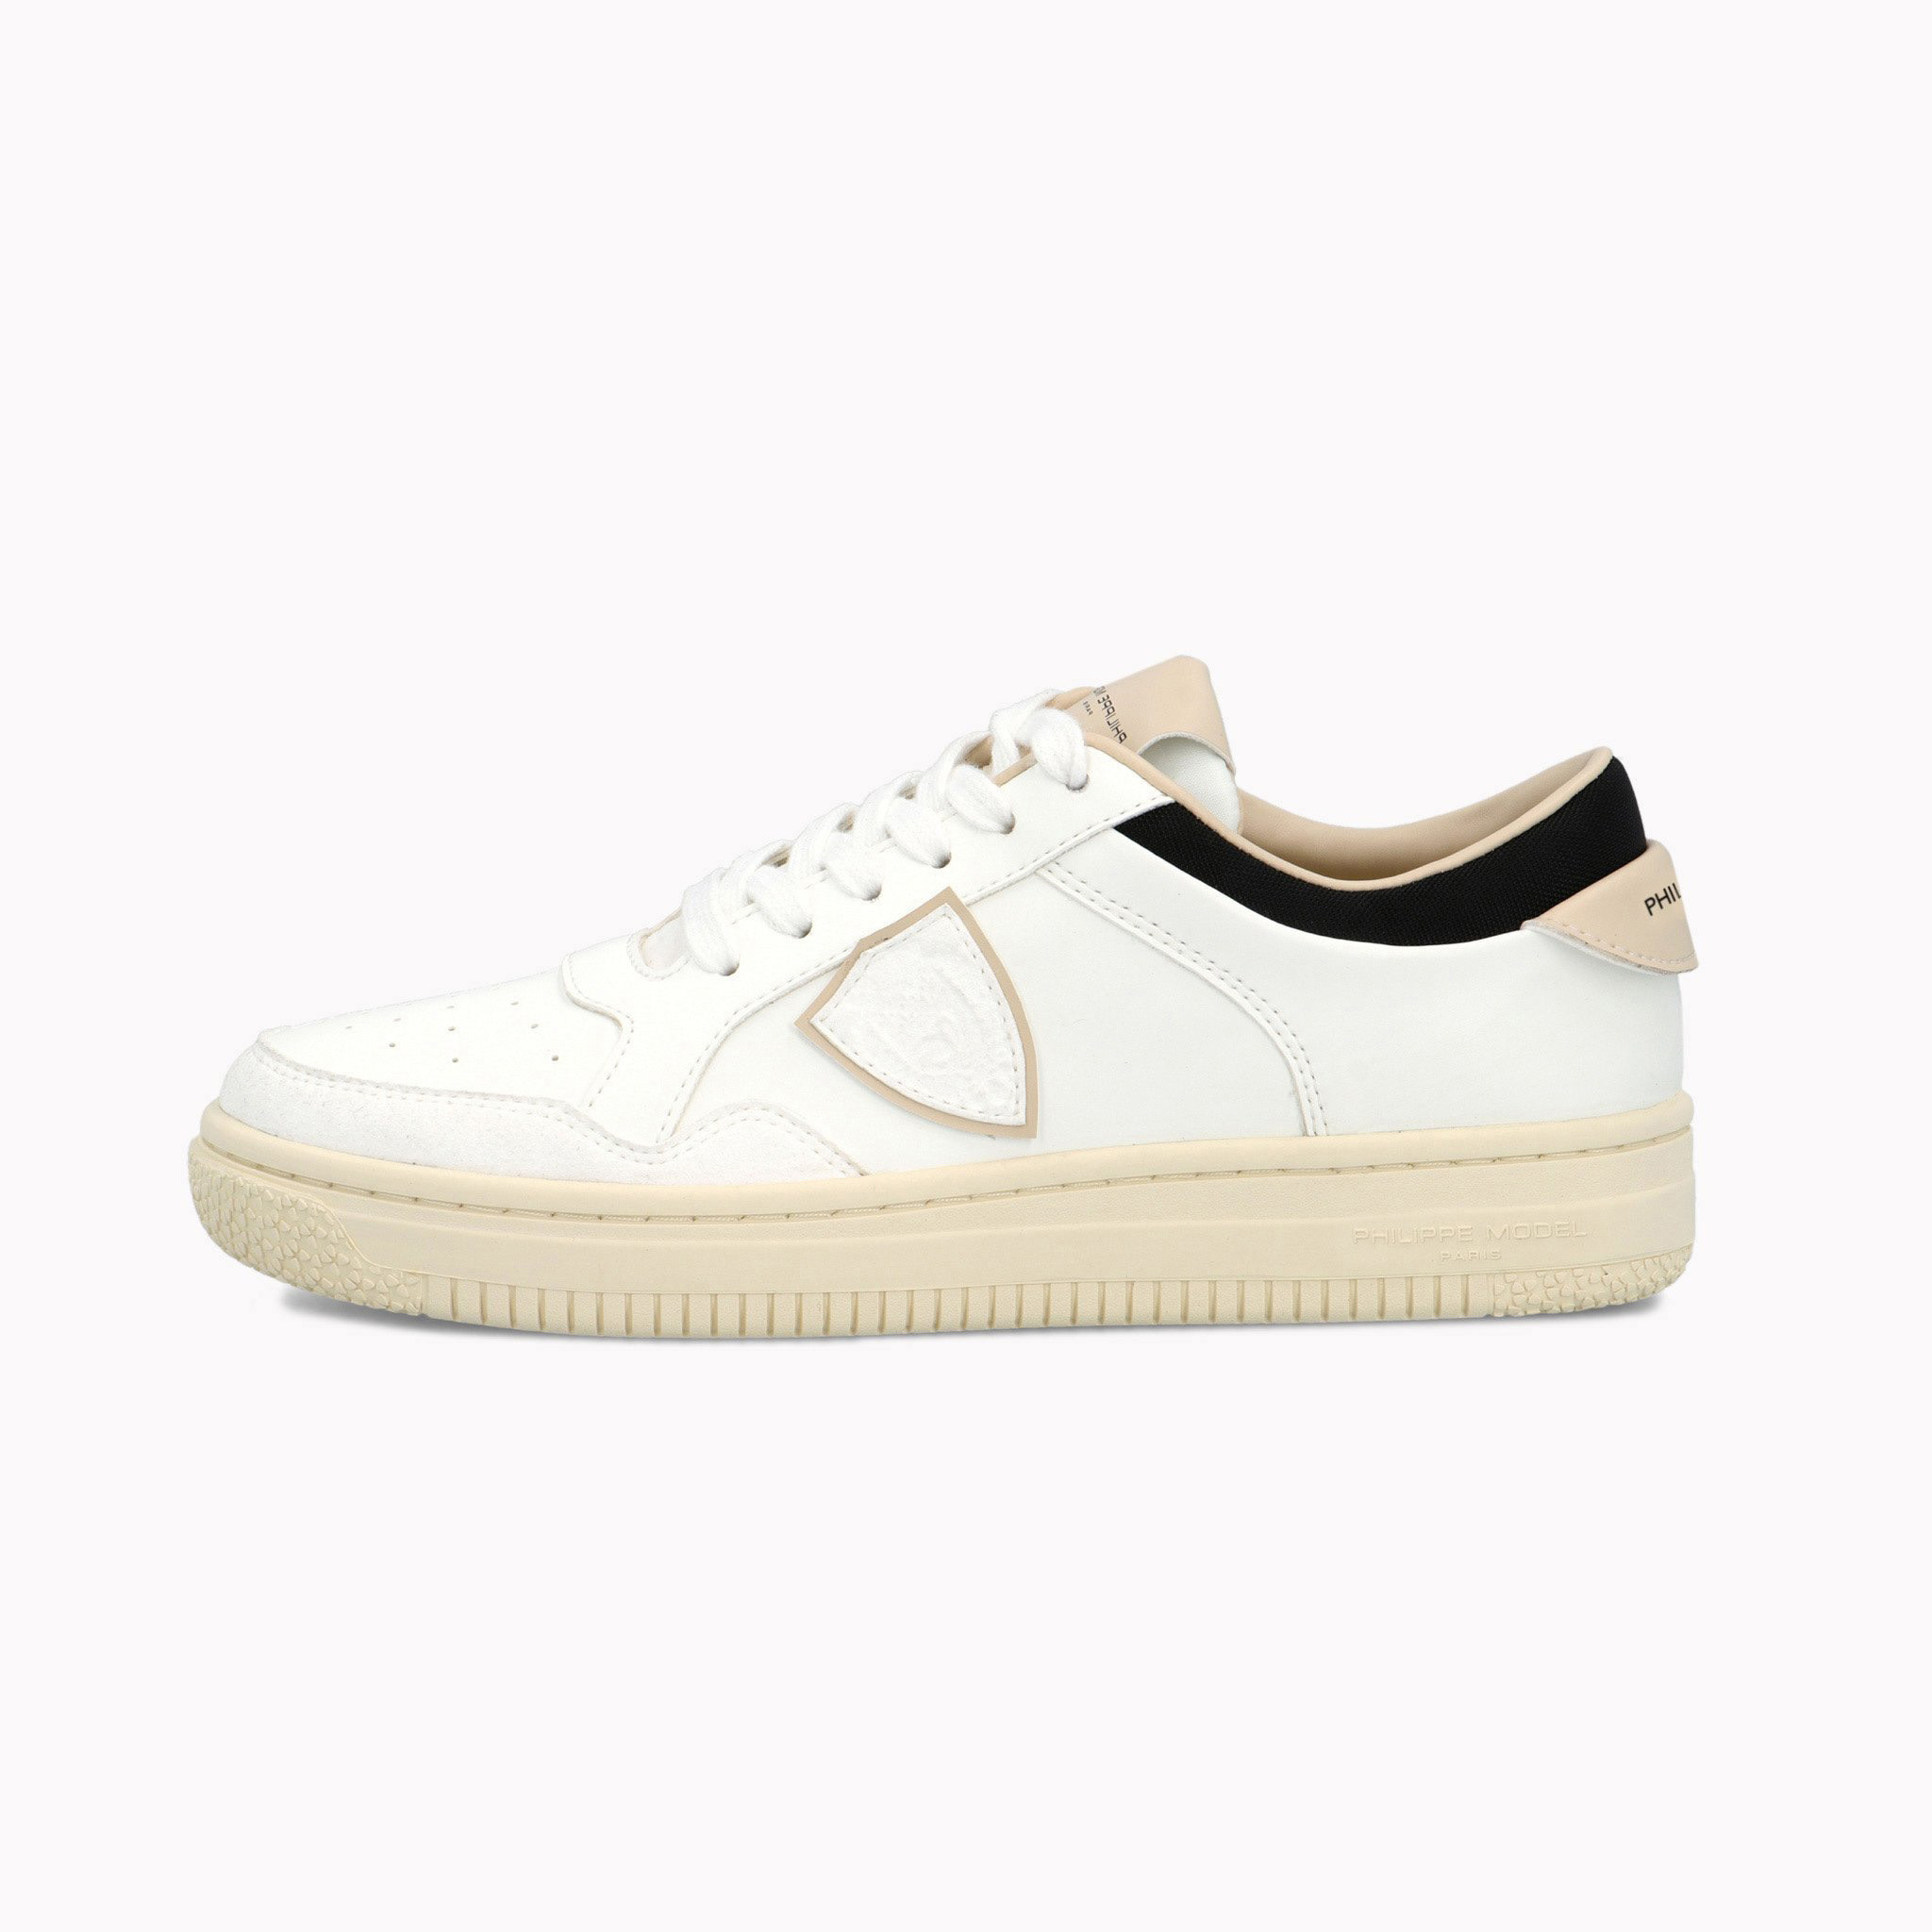 Medic Consequent buurman Philippe Model White & Beige - Green Sneaker Store